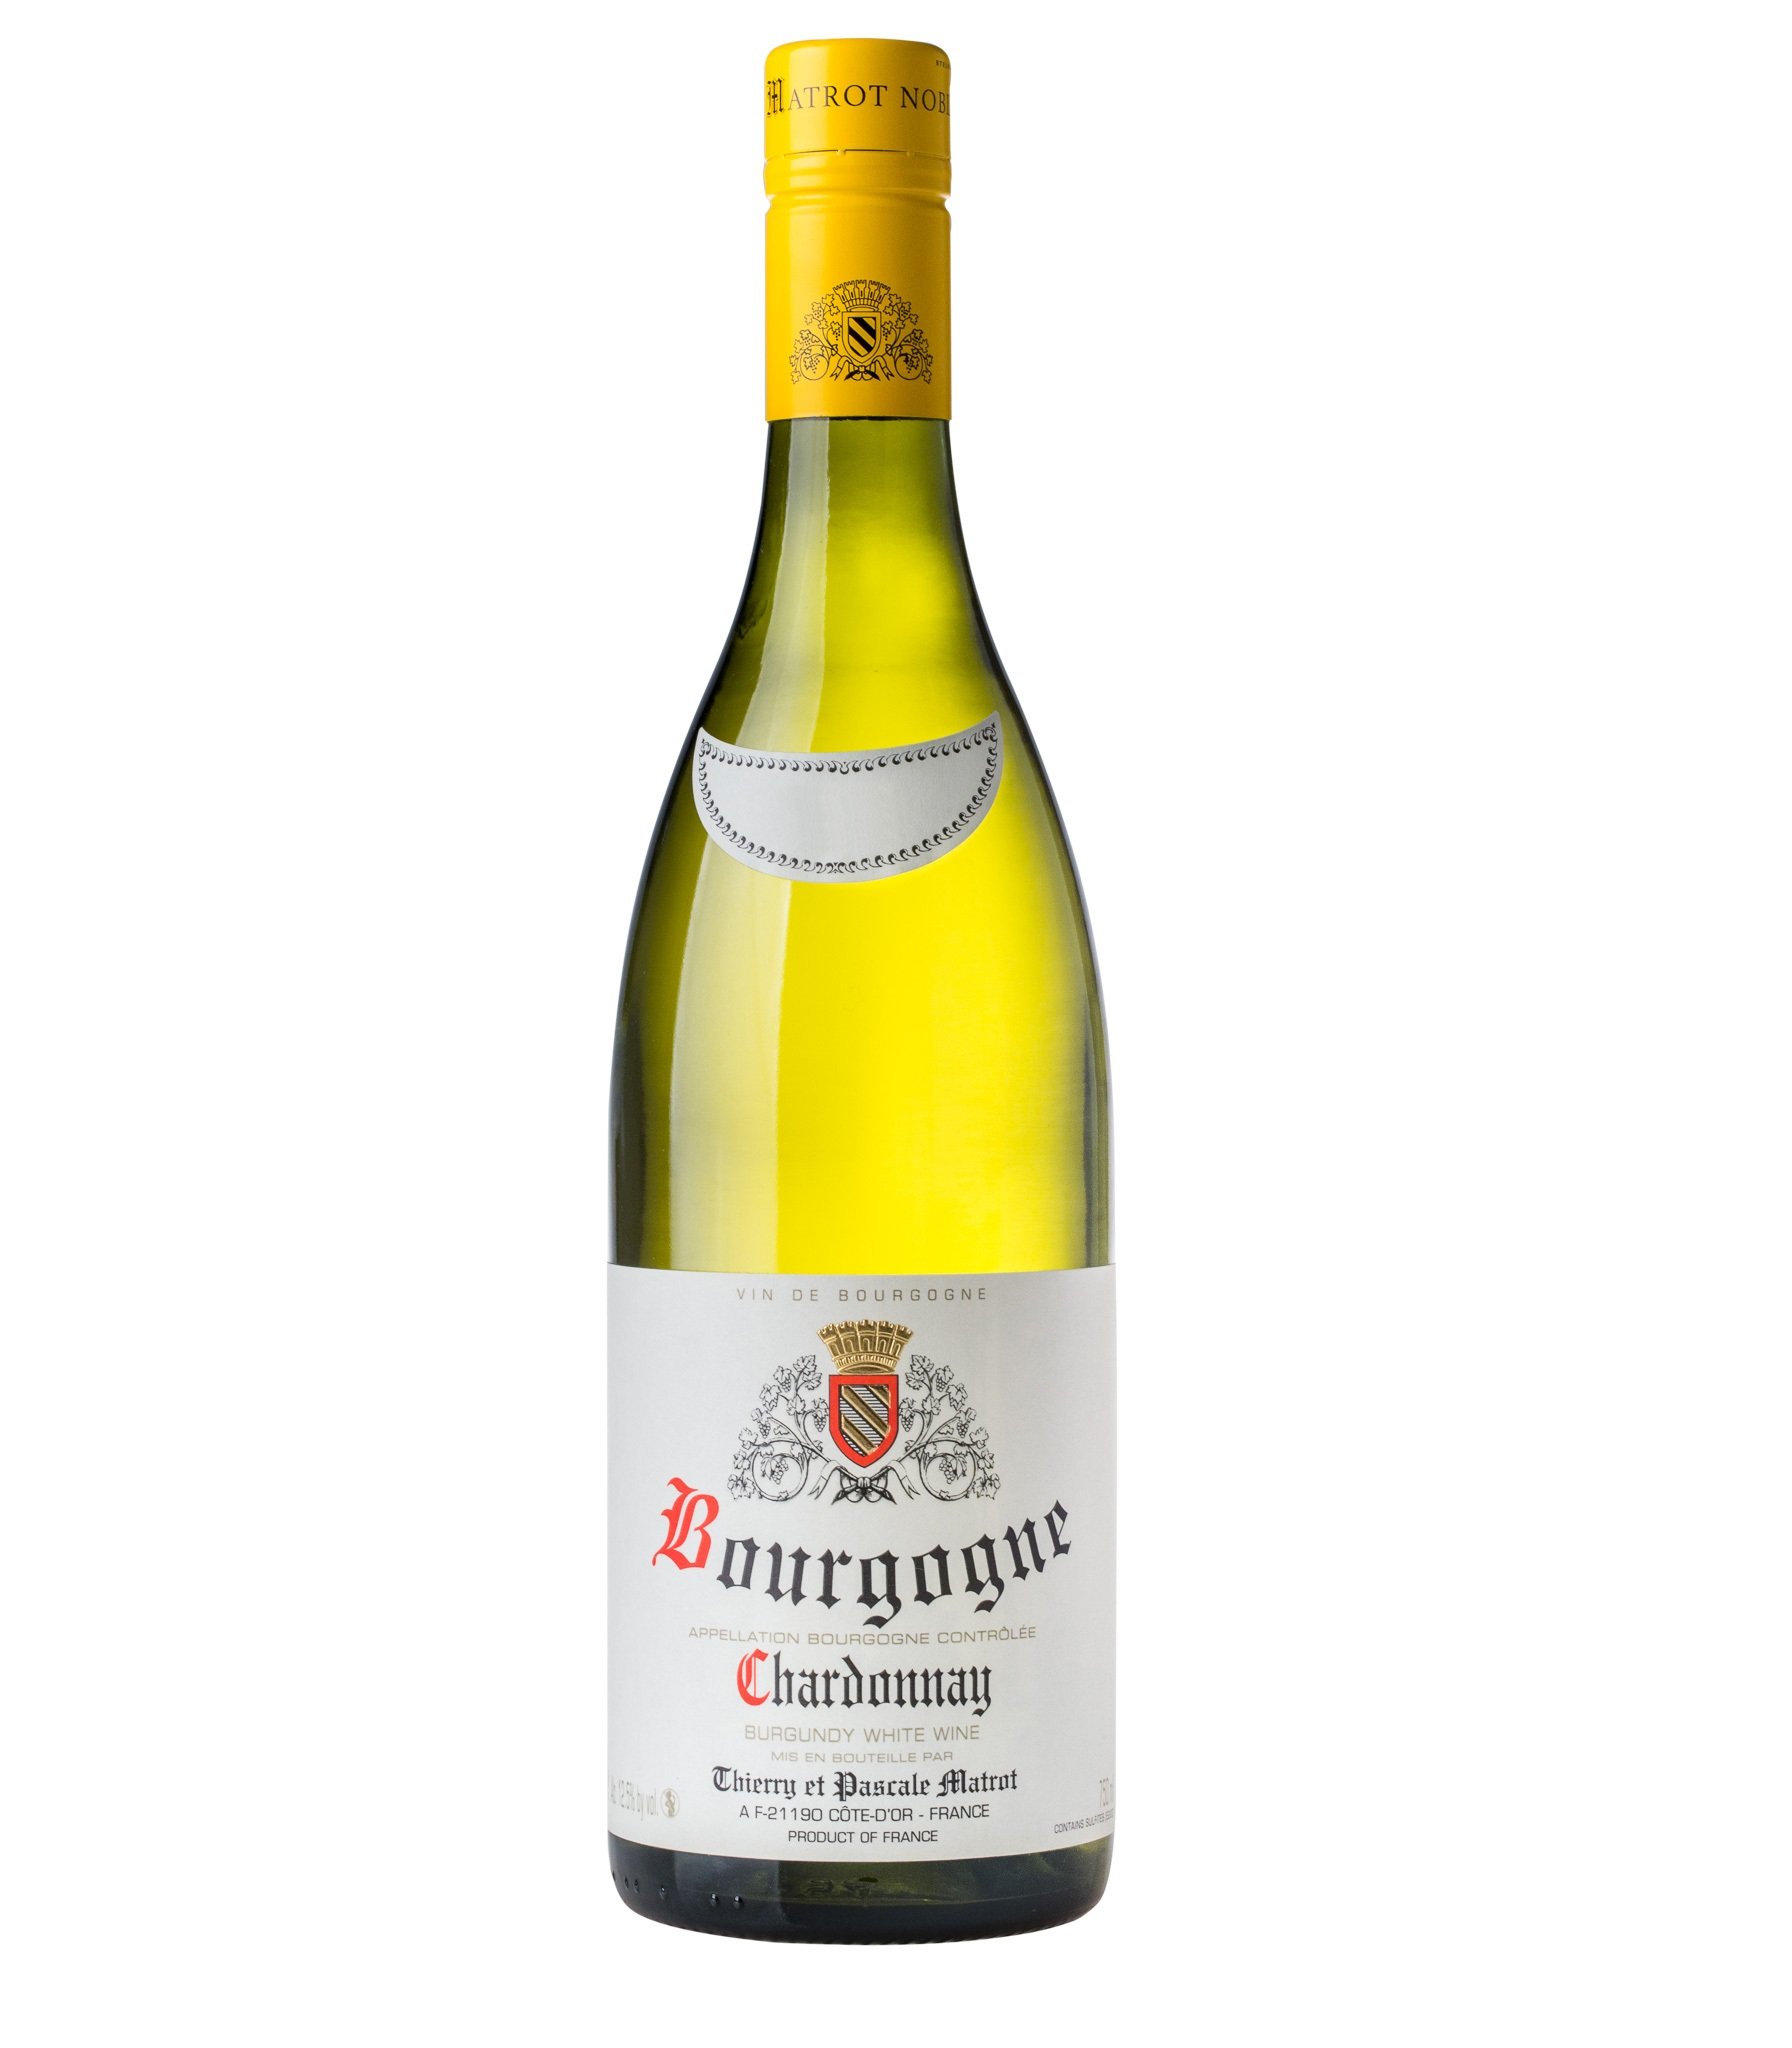 2017 Thierry et Pascale Matrot Bourgogne Chardonnay